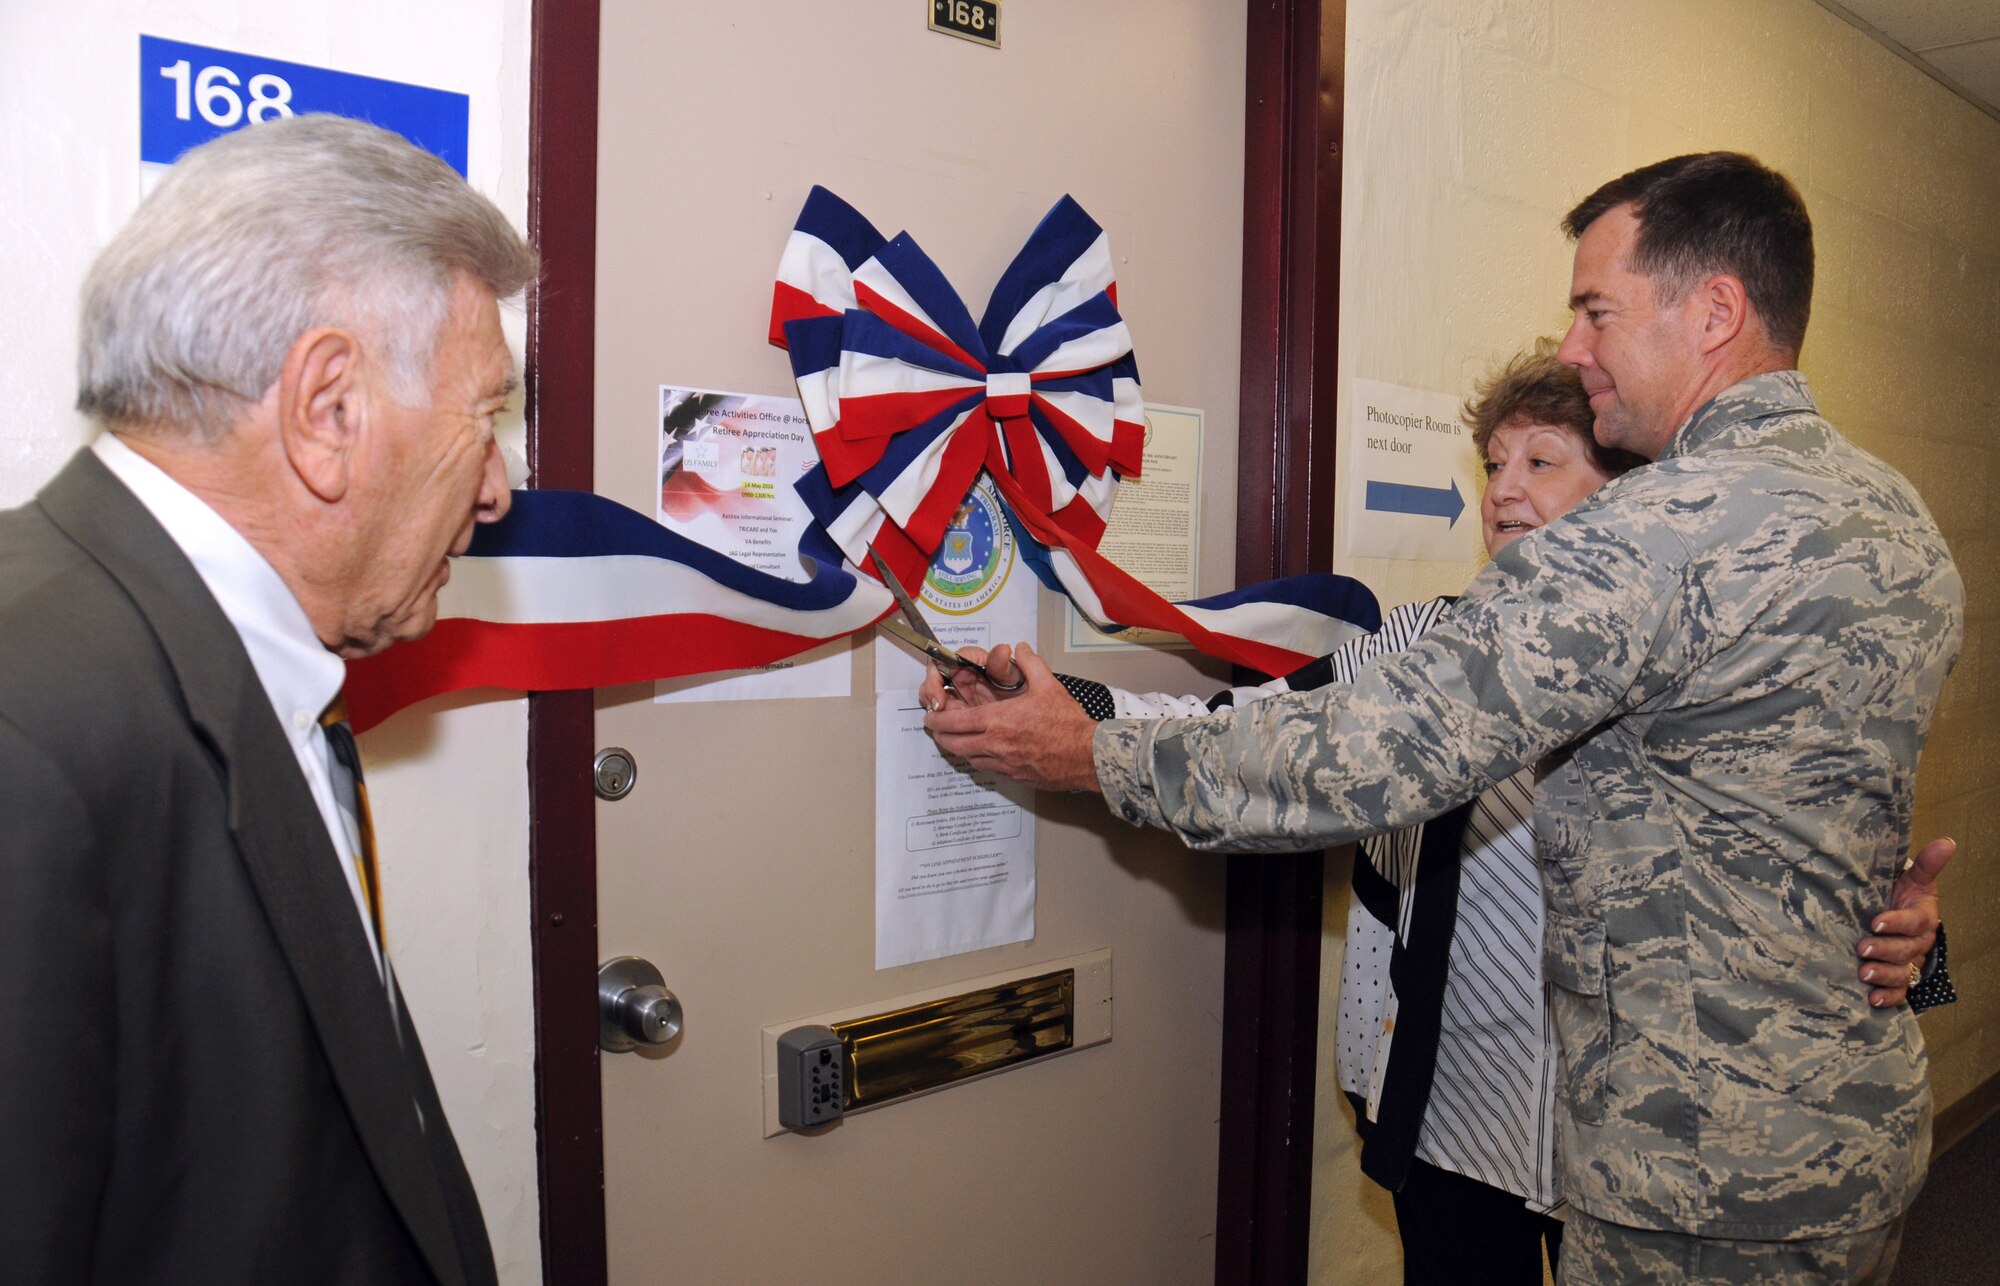 Col. William R. Griffin, Vice Commander of the 111th Attack Wing, and retired Chief Master Sgt. Jenny W. Pappas, Director of the 111th ATKW Retiree’s Activities Office, cut the ceremonial ribbon to the newly-founded 111th ATKW Retiree’s Activities Office at Horsham Air Guard Station, Pennsylvania, May 14, 2016. Attendees of the Retirees Appreciation Day held on base watched as the ribbon cutting ended the day-long event full of speakers, information and events for retired, recently retired and soon-to-be retired military personnel and spouses. (U.S. Air National Guard photo by Staff Sgt. Michael Shaffer)